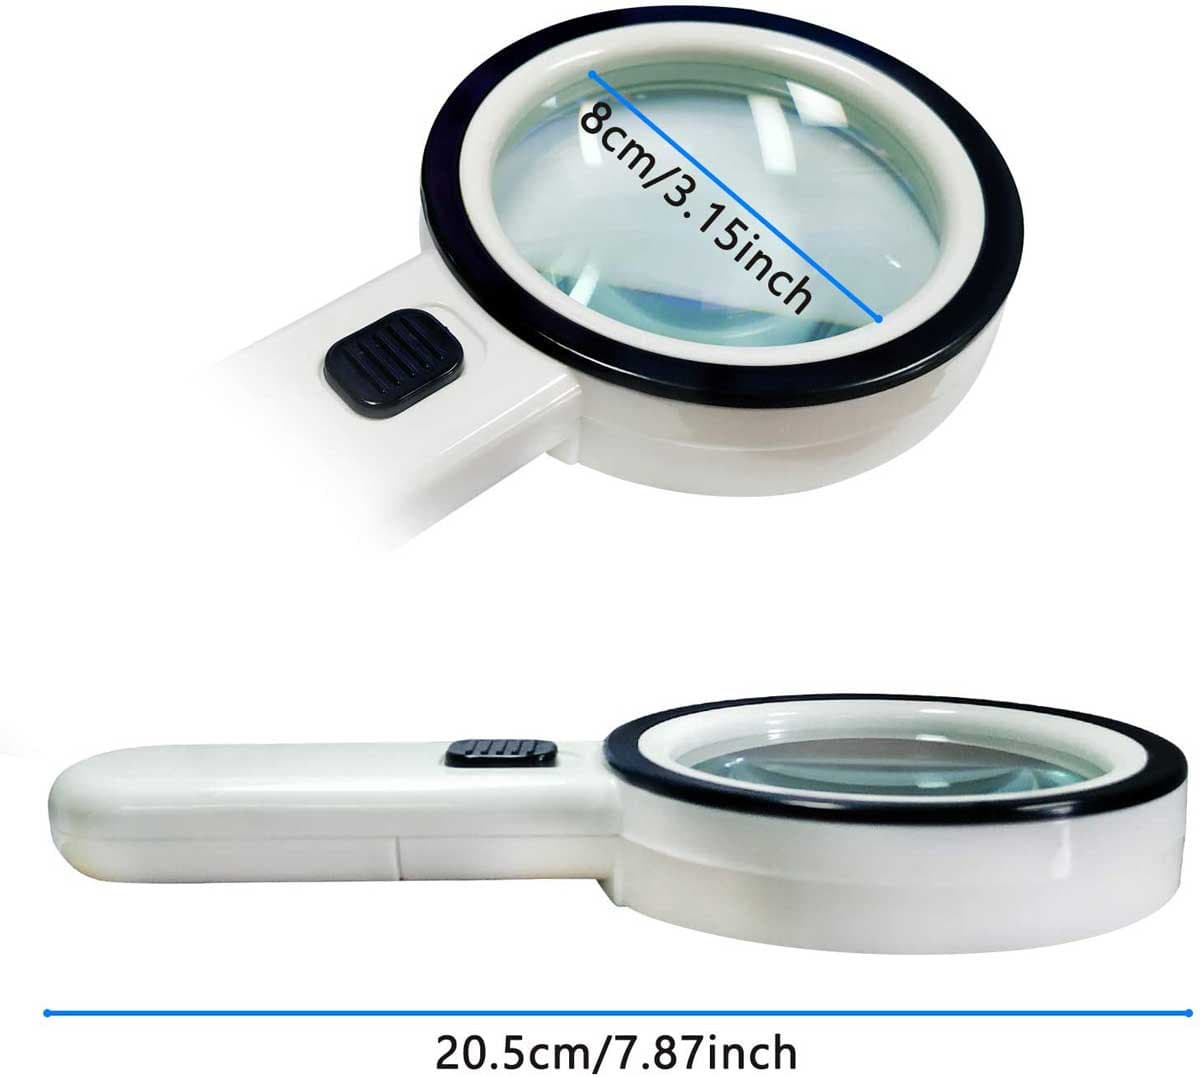 Living Made Easy - Explorer Illuminated Magnifying Glass With Led Light)